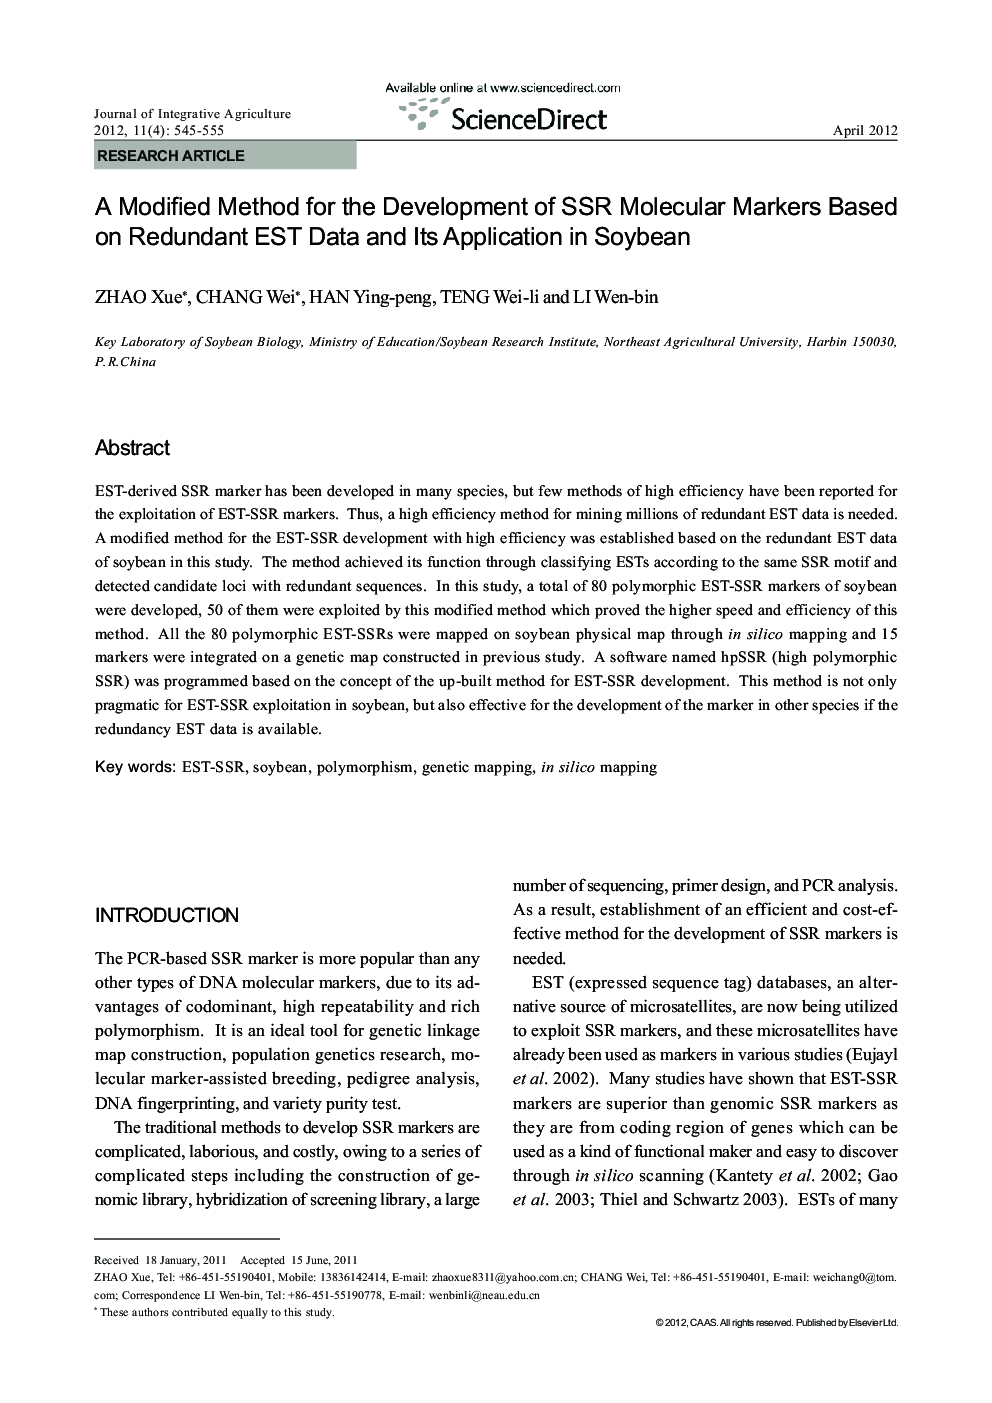 A Modified Method for the Development of SSR Molecular Markers Based on Redundant EST Data and Its Application in Soybean